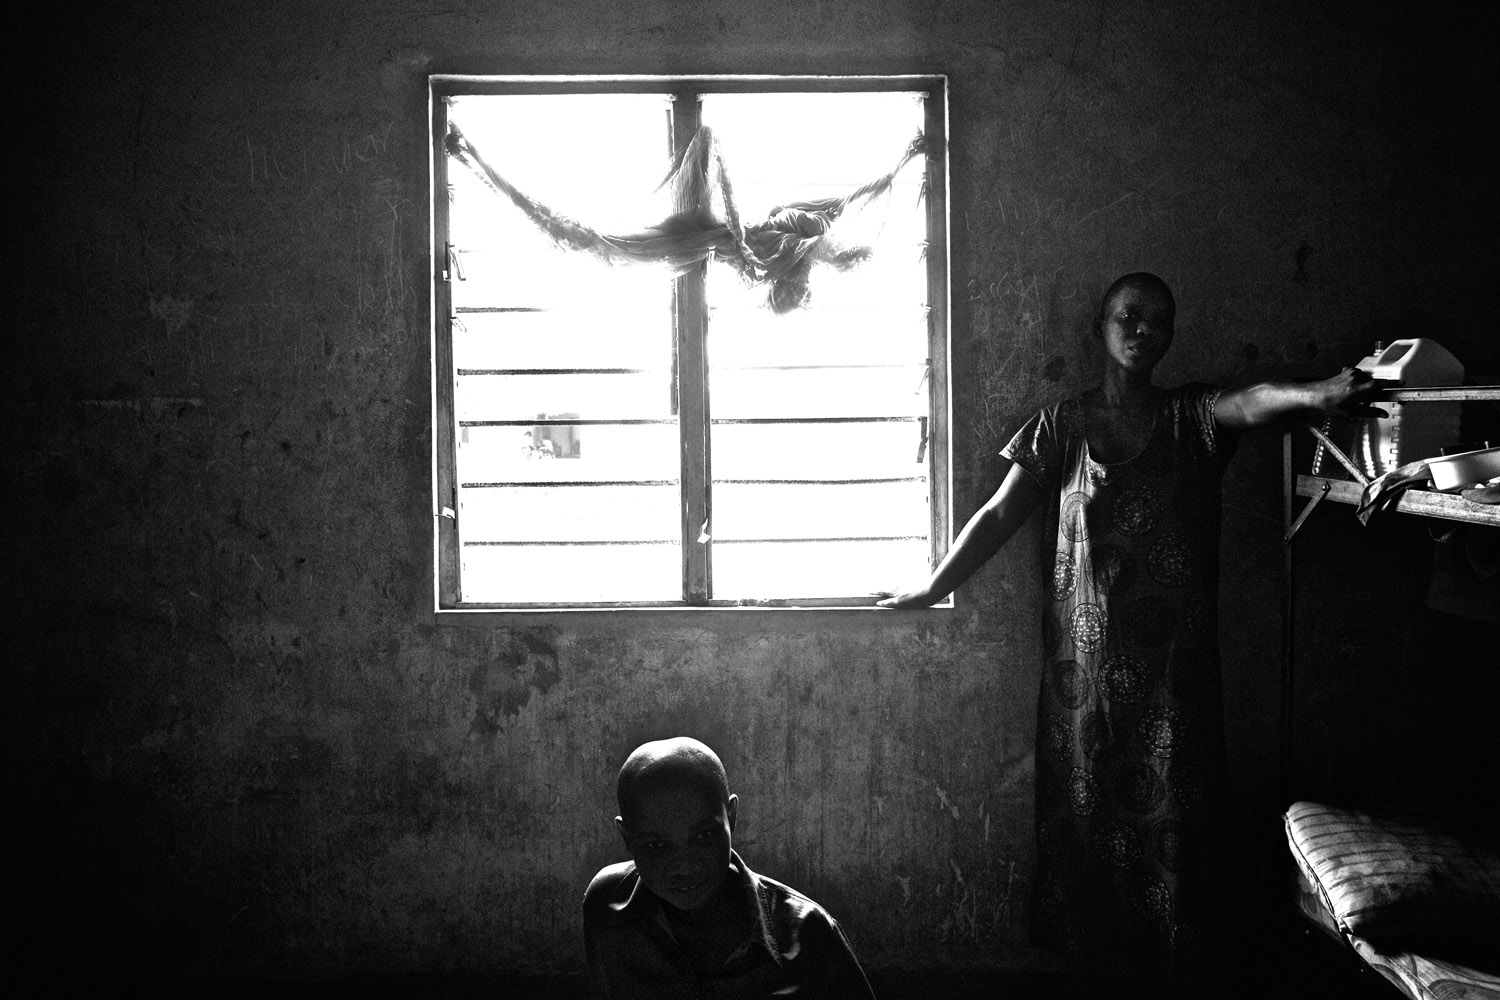 This so called Rehabilitation facility outside the Niger Delta city of Port Harcourt holds over 170 people with mental illness or mental disability. The Niger Delta, Nigeria. October 2012.